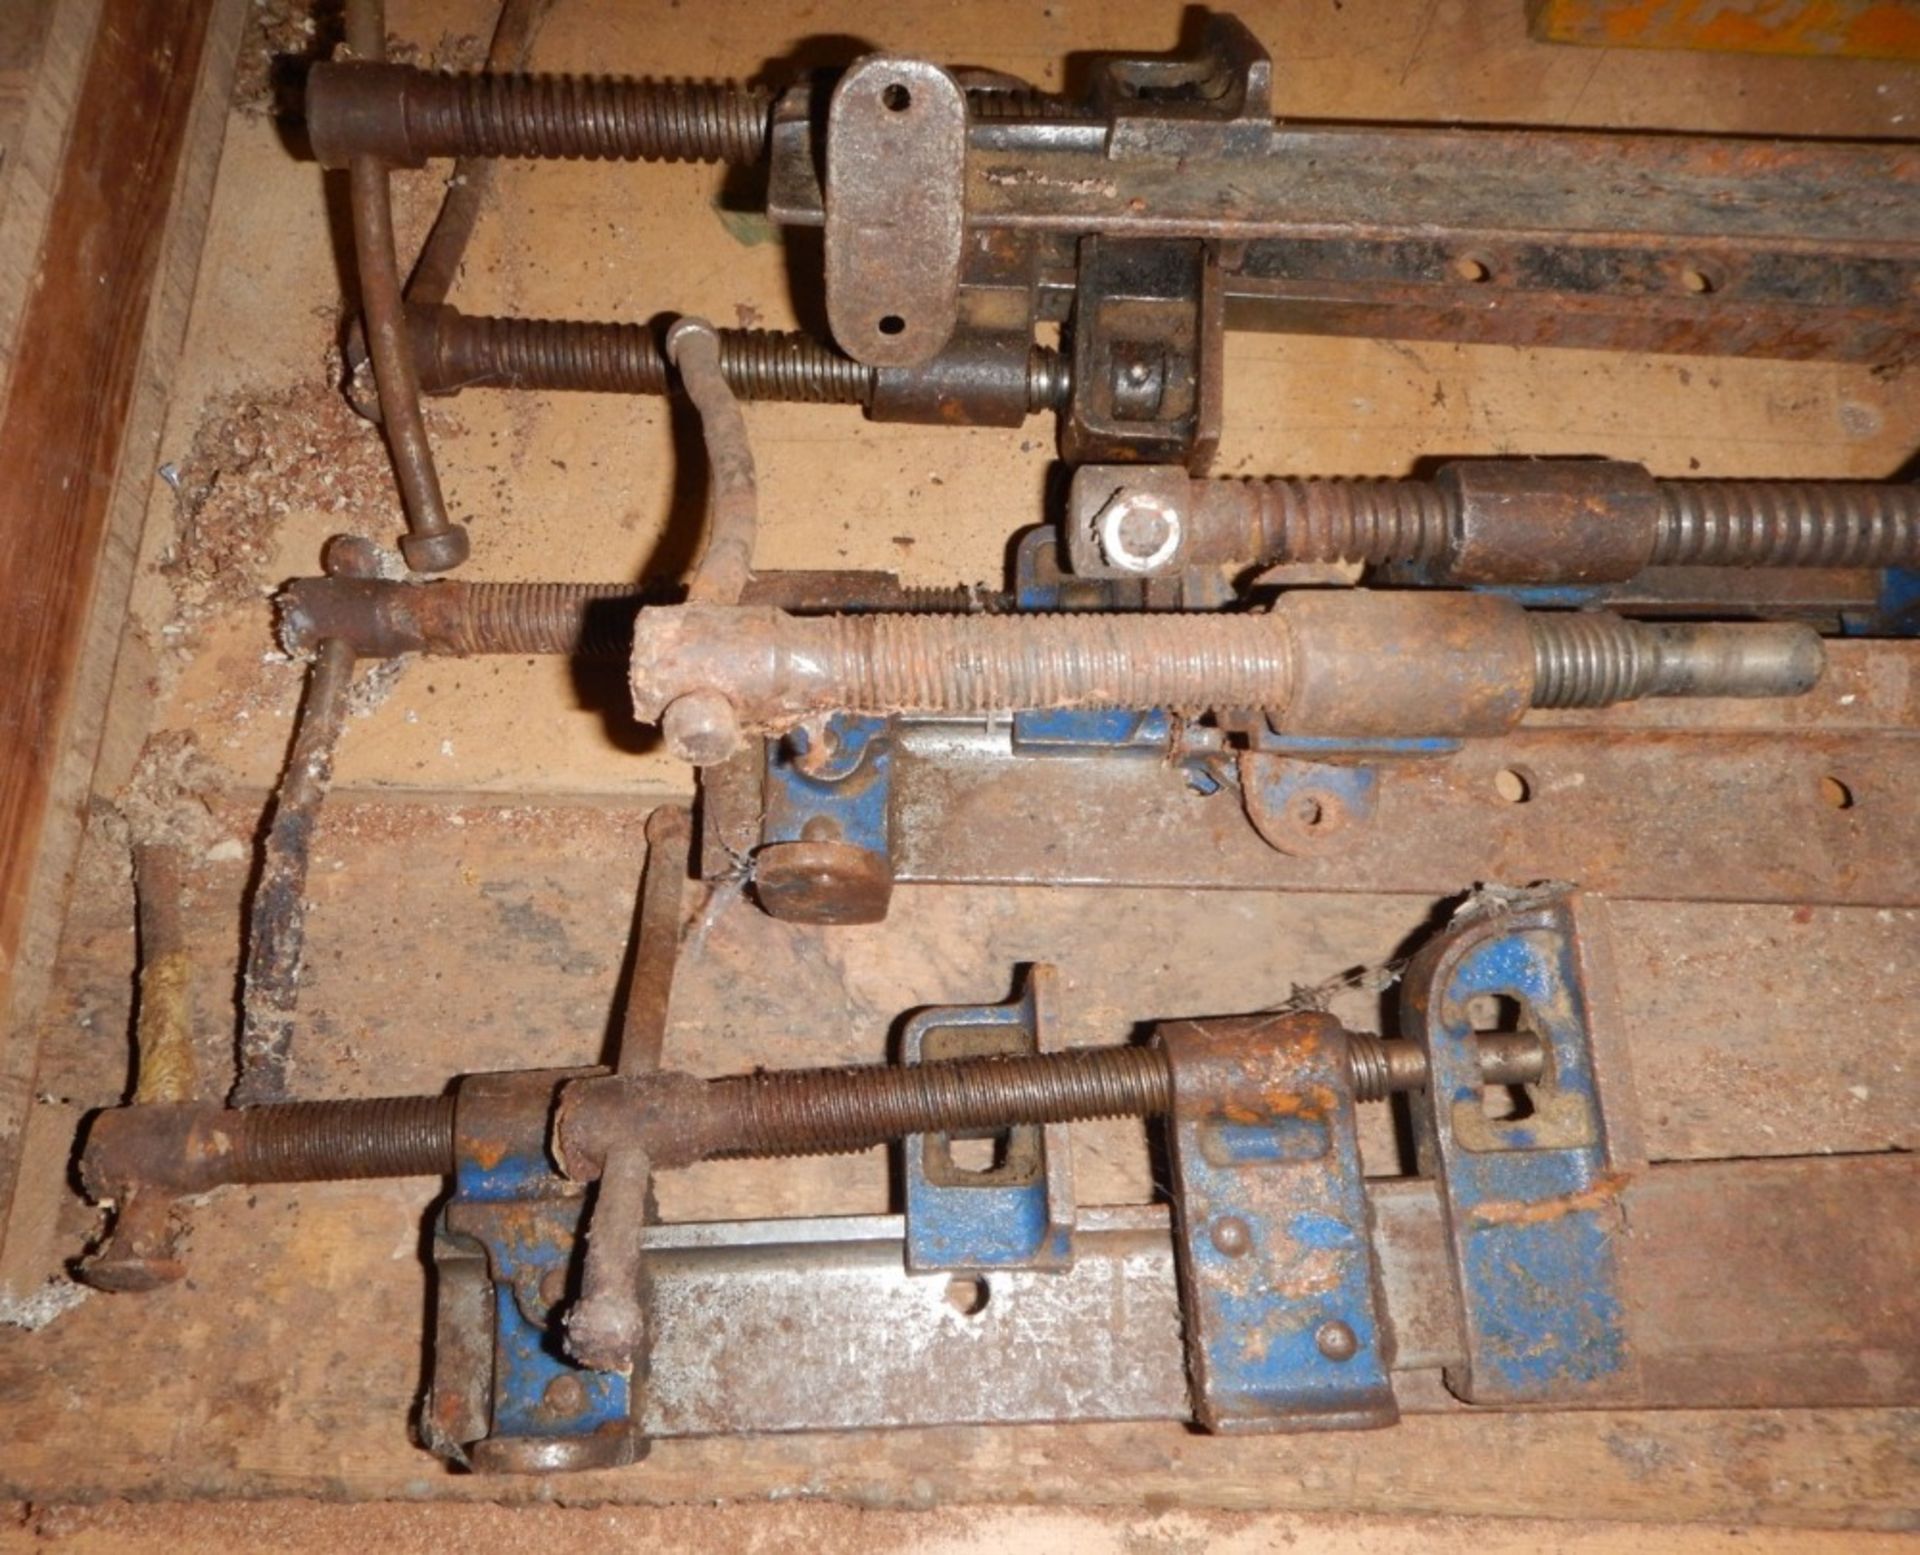 A collection of sash clamps.